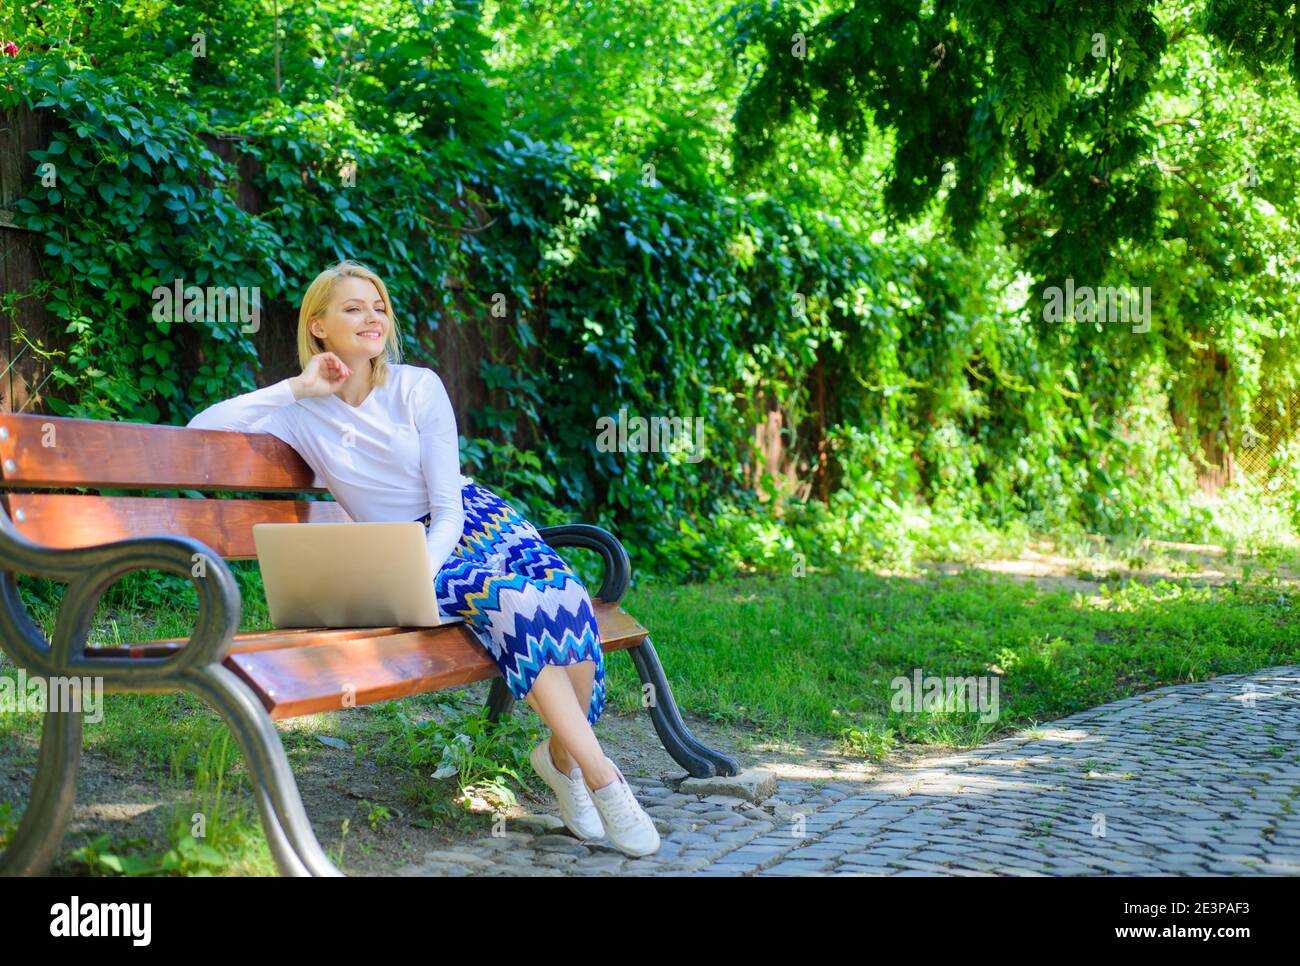 Save your time with shopping online. Shopping online. Girl sit bench with notebook. Woman with laptop in park enjoy green nature and fresh air. Girl dreamy takes advantage of online shopping. Stock Photo